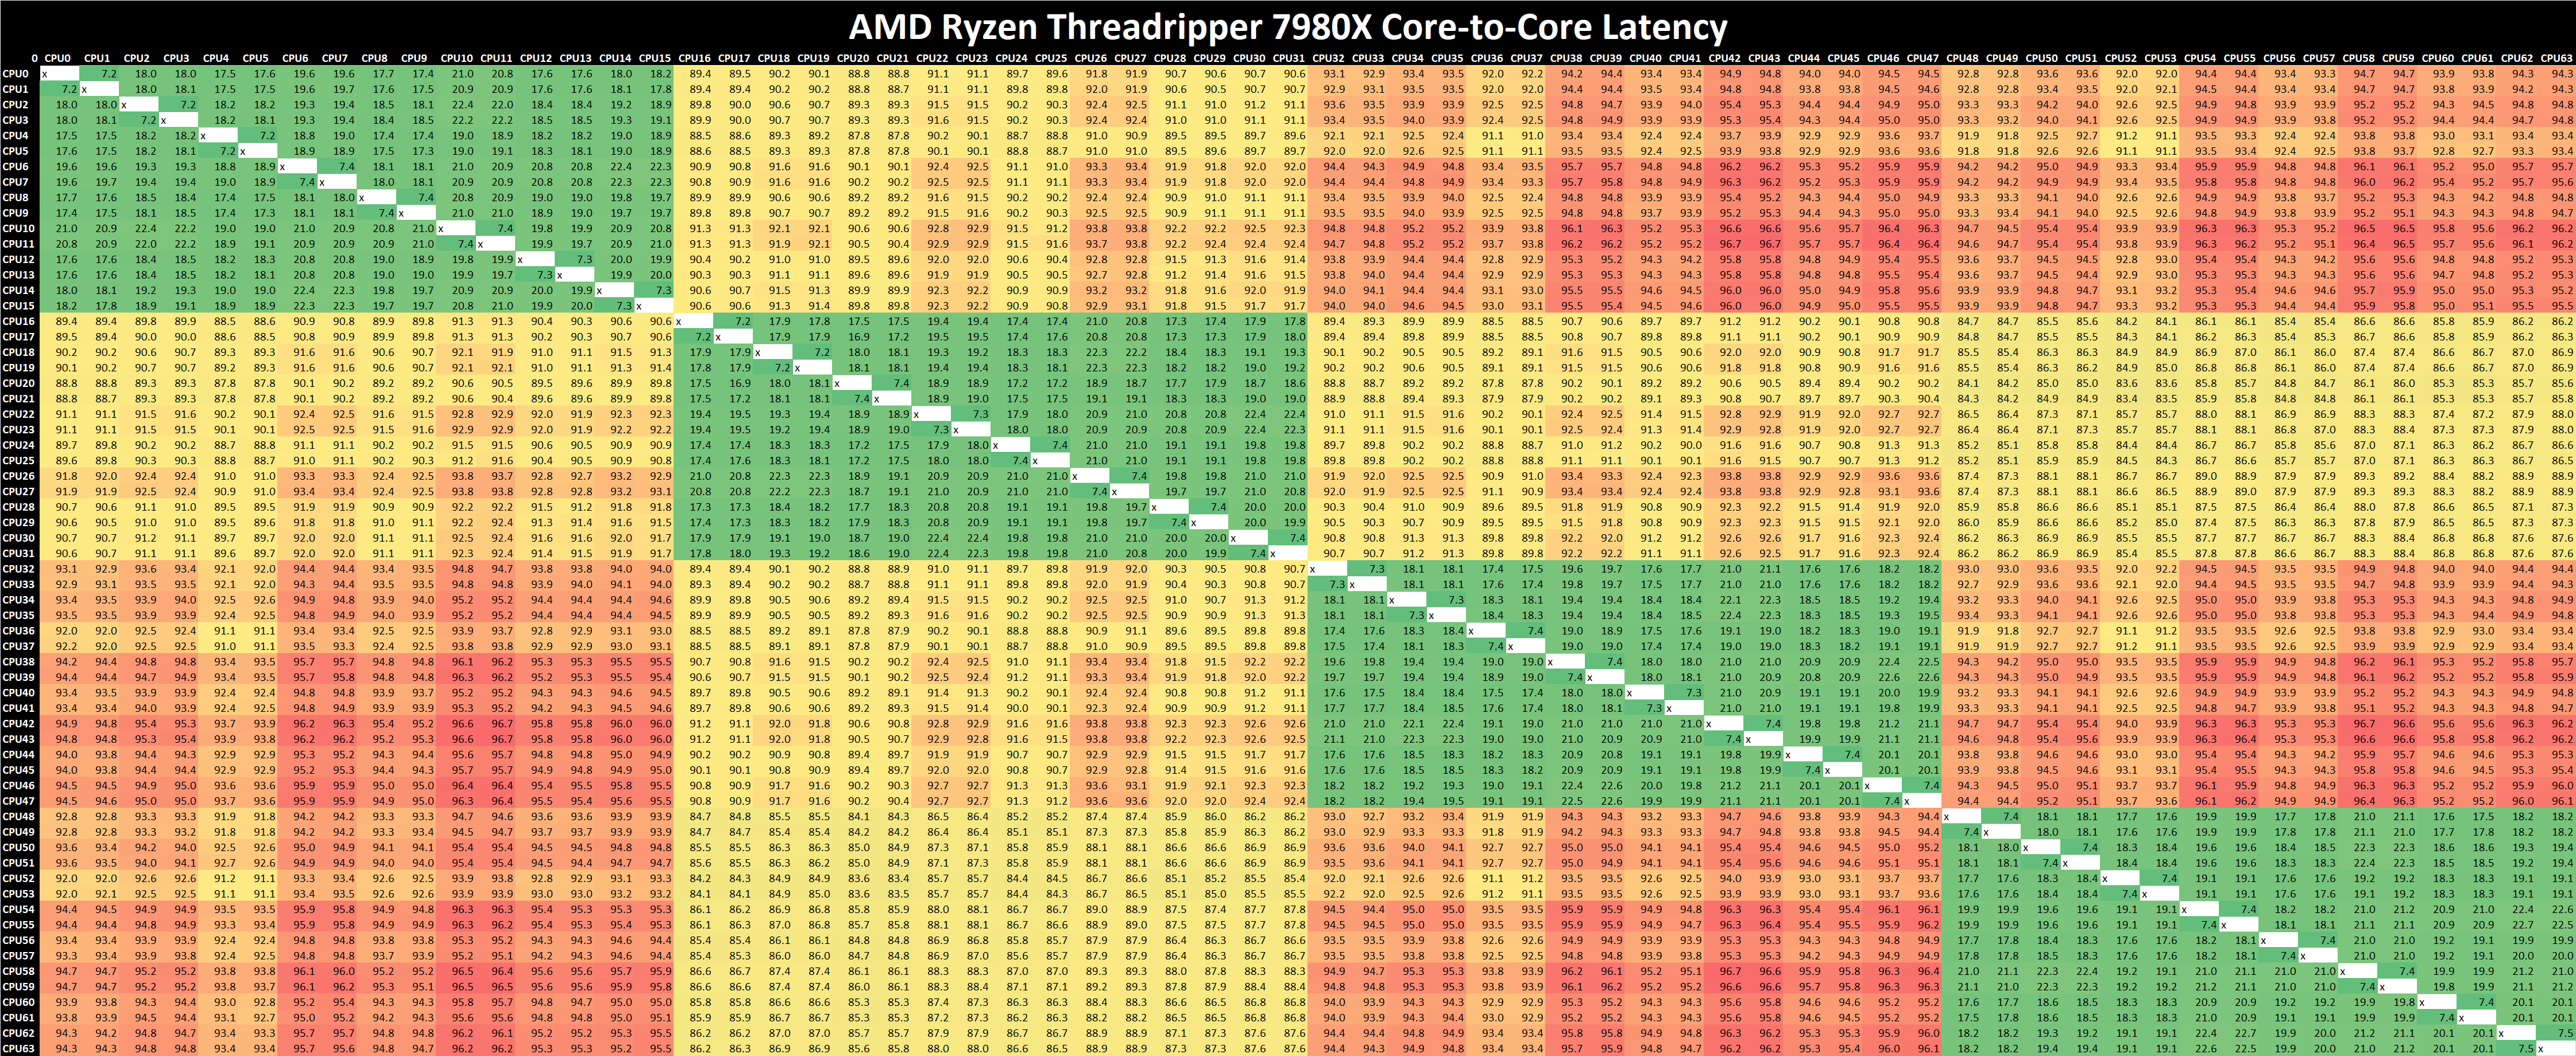 AMD Ryzen Threadripper 7980X & 7970X Review: Revived HEDT Brings More Cores  of Zen 4